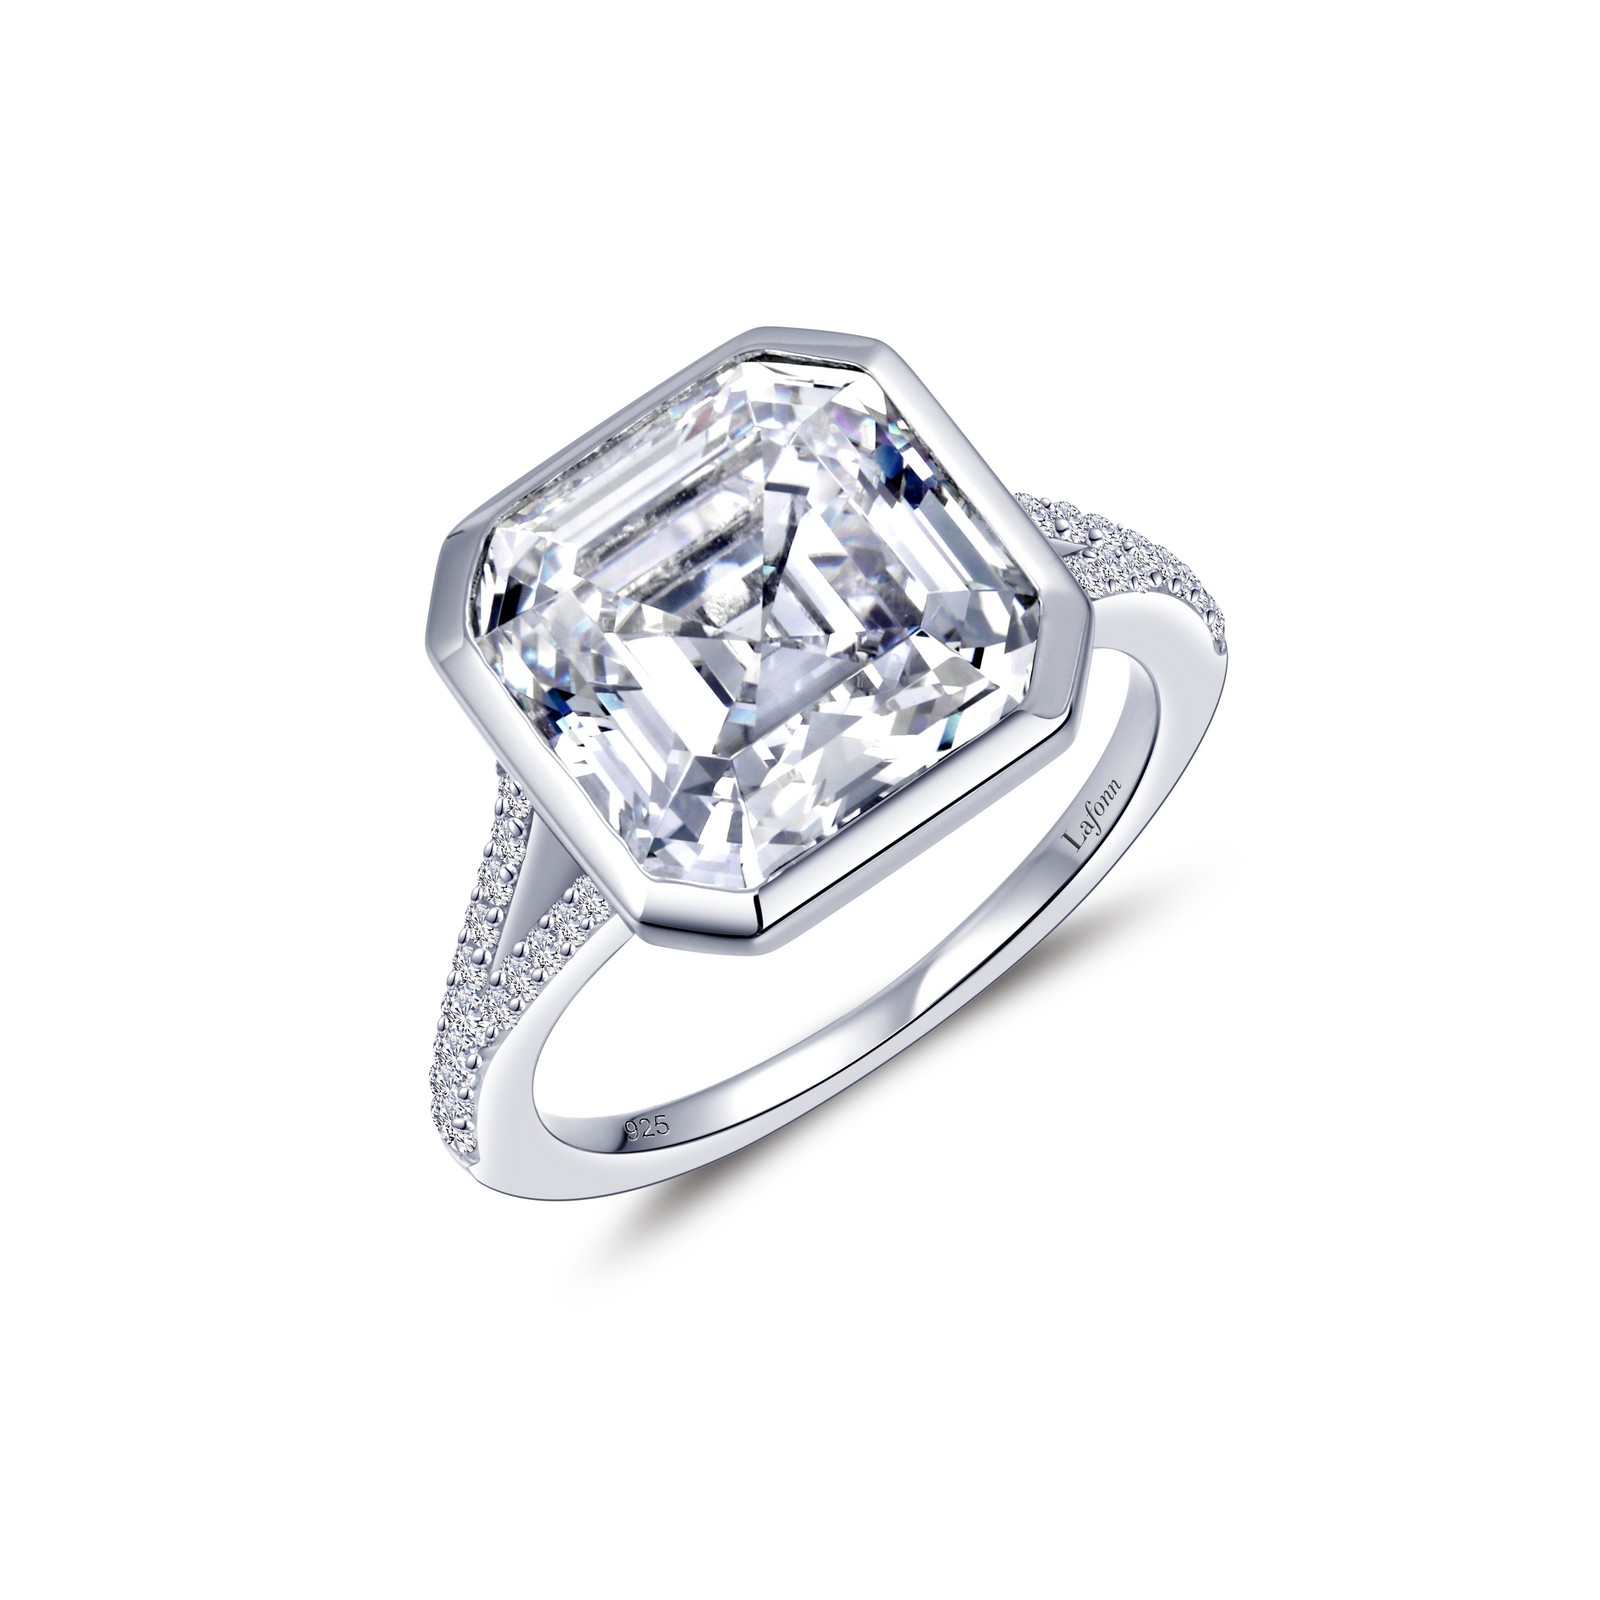 Stunning Engagement Ring - Elegant and sophisticated. This dramatic ring features a bezel-set Lafonn asscher-cut simulated diamond and a split shank set with Lafonn simulated diamonds. The ring is in sterling silver bonded with platinum.